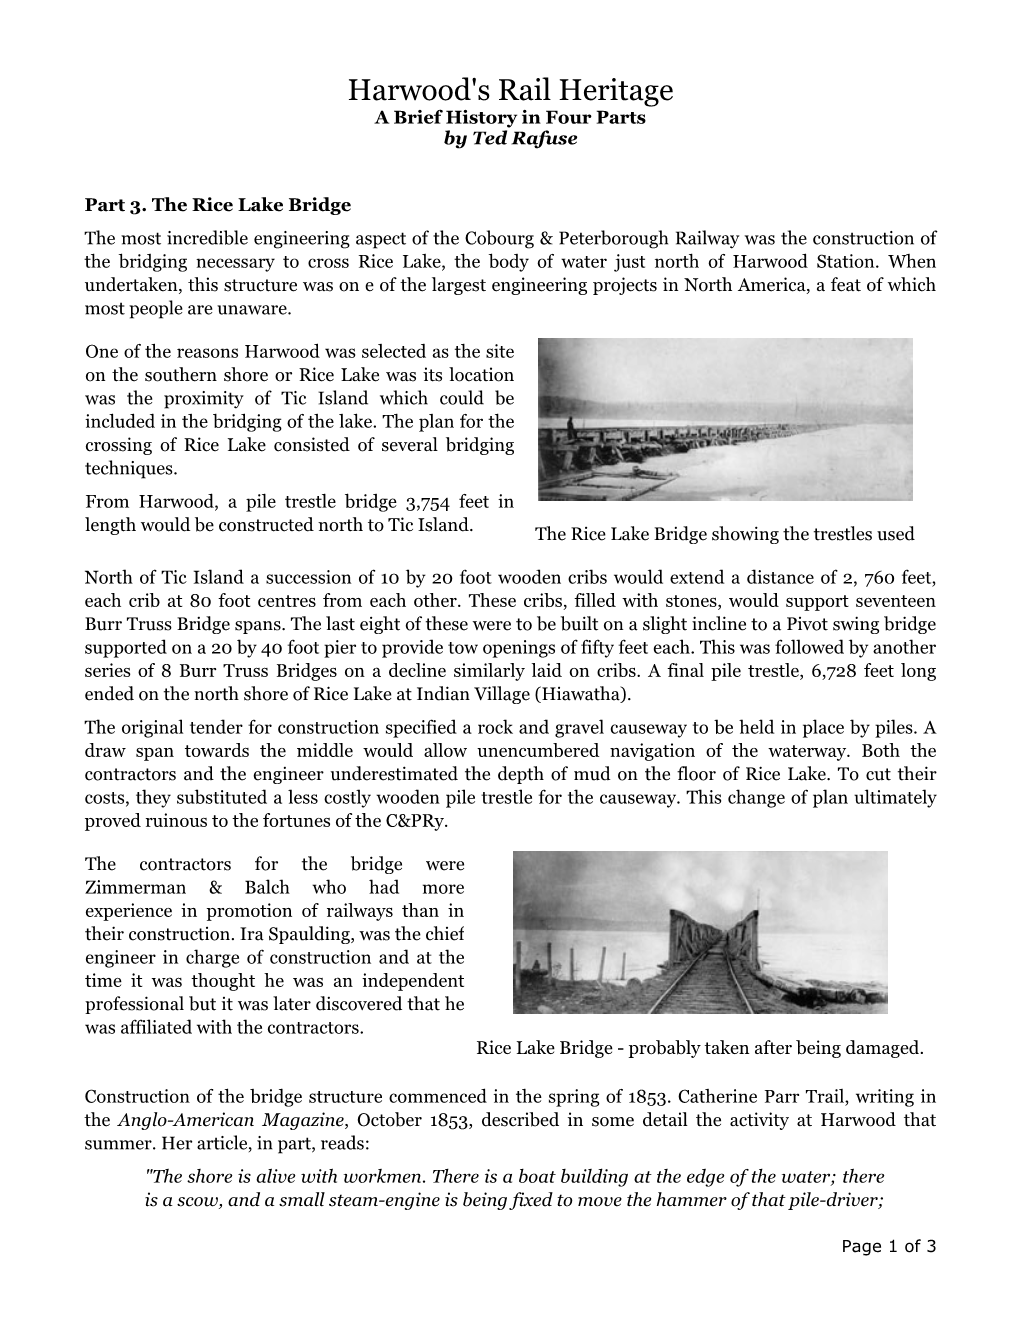 Harwood's Rail Heritage a Brief History in Four Parts by Ted Rafuse